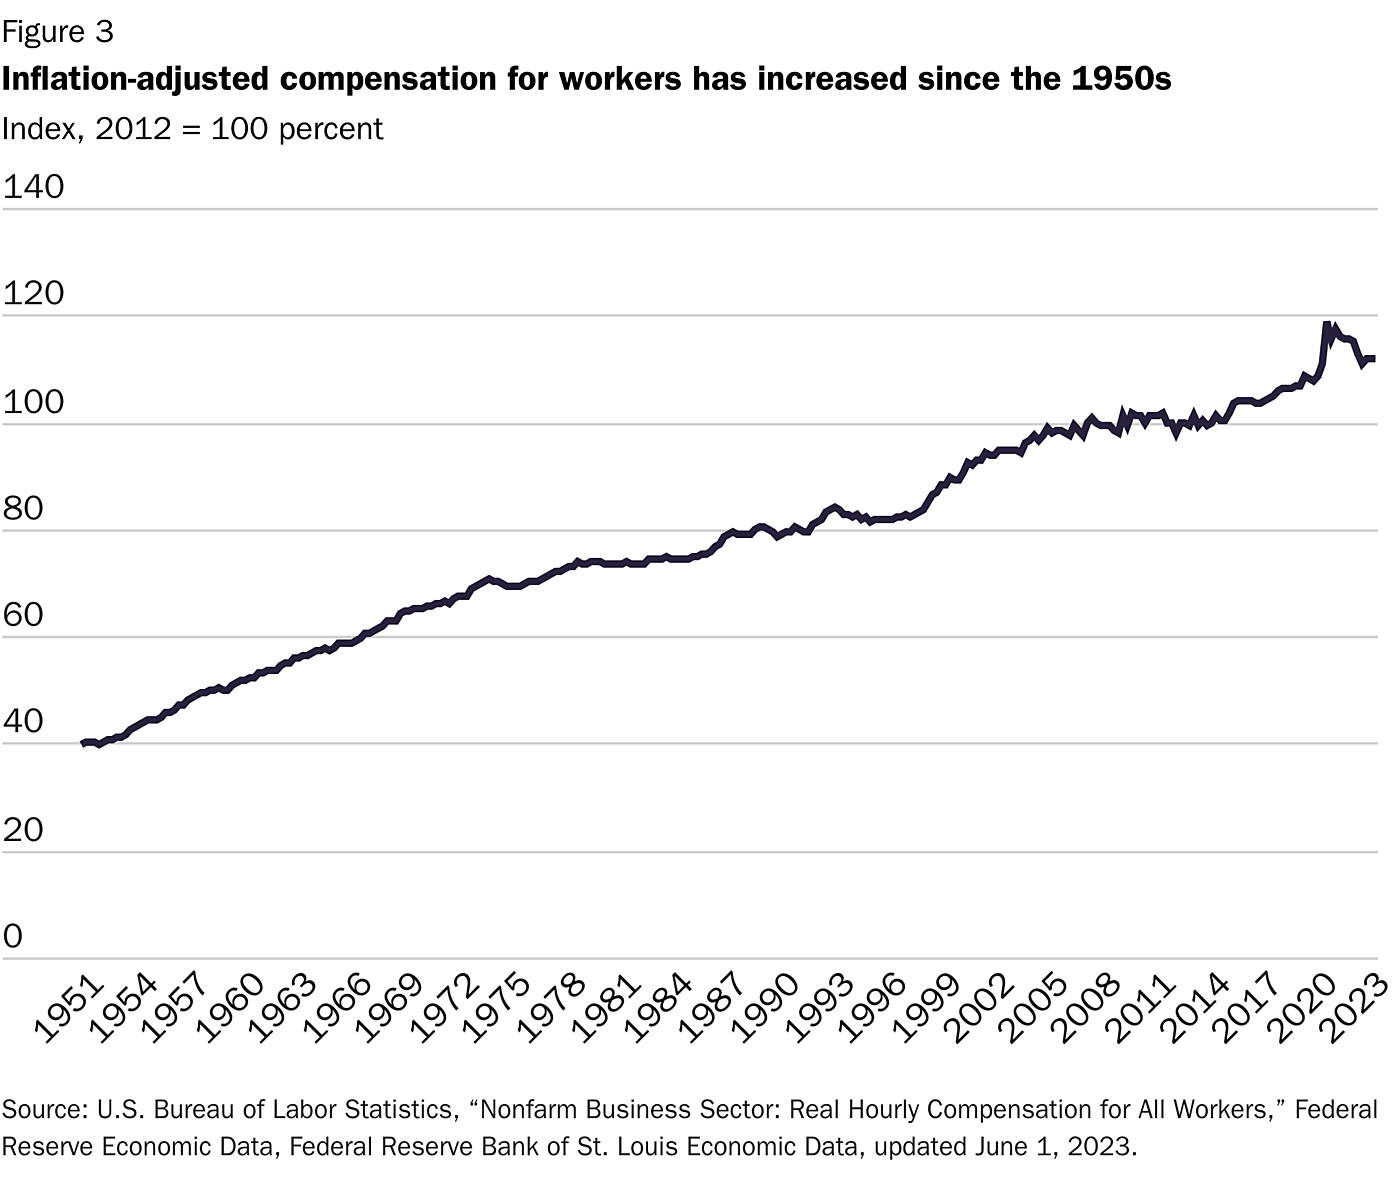 figure-3-inflation-adjusted-compensation-for-workers-has-also-increased-since-the-1950s